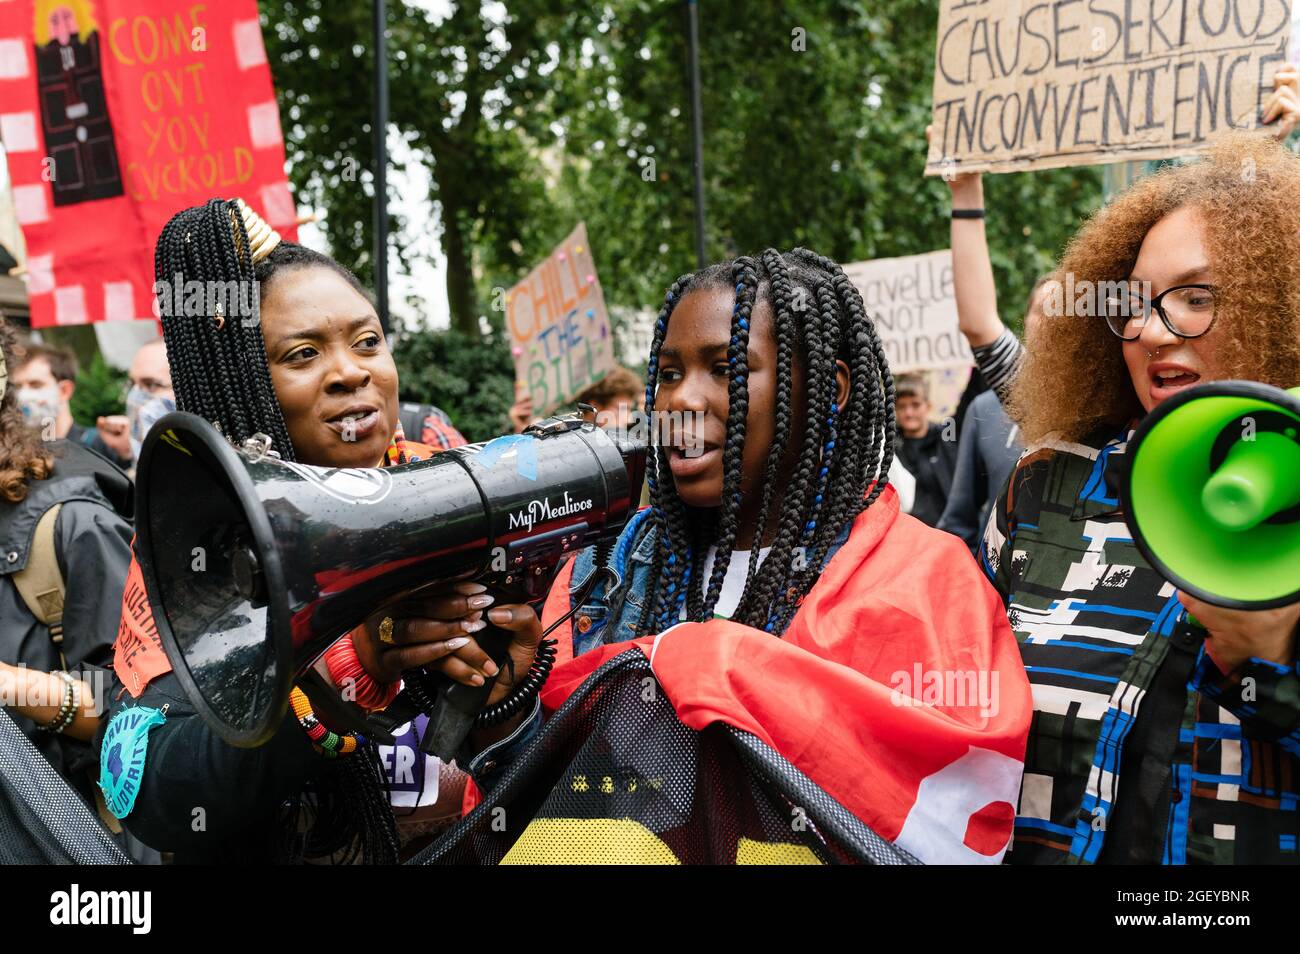 London, UK. 21 August 2021. 'Kill The Bill' protest in London against the government's proposed Police, Crime, Sentencing and Courts Bill. Stock Photo